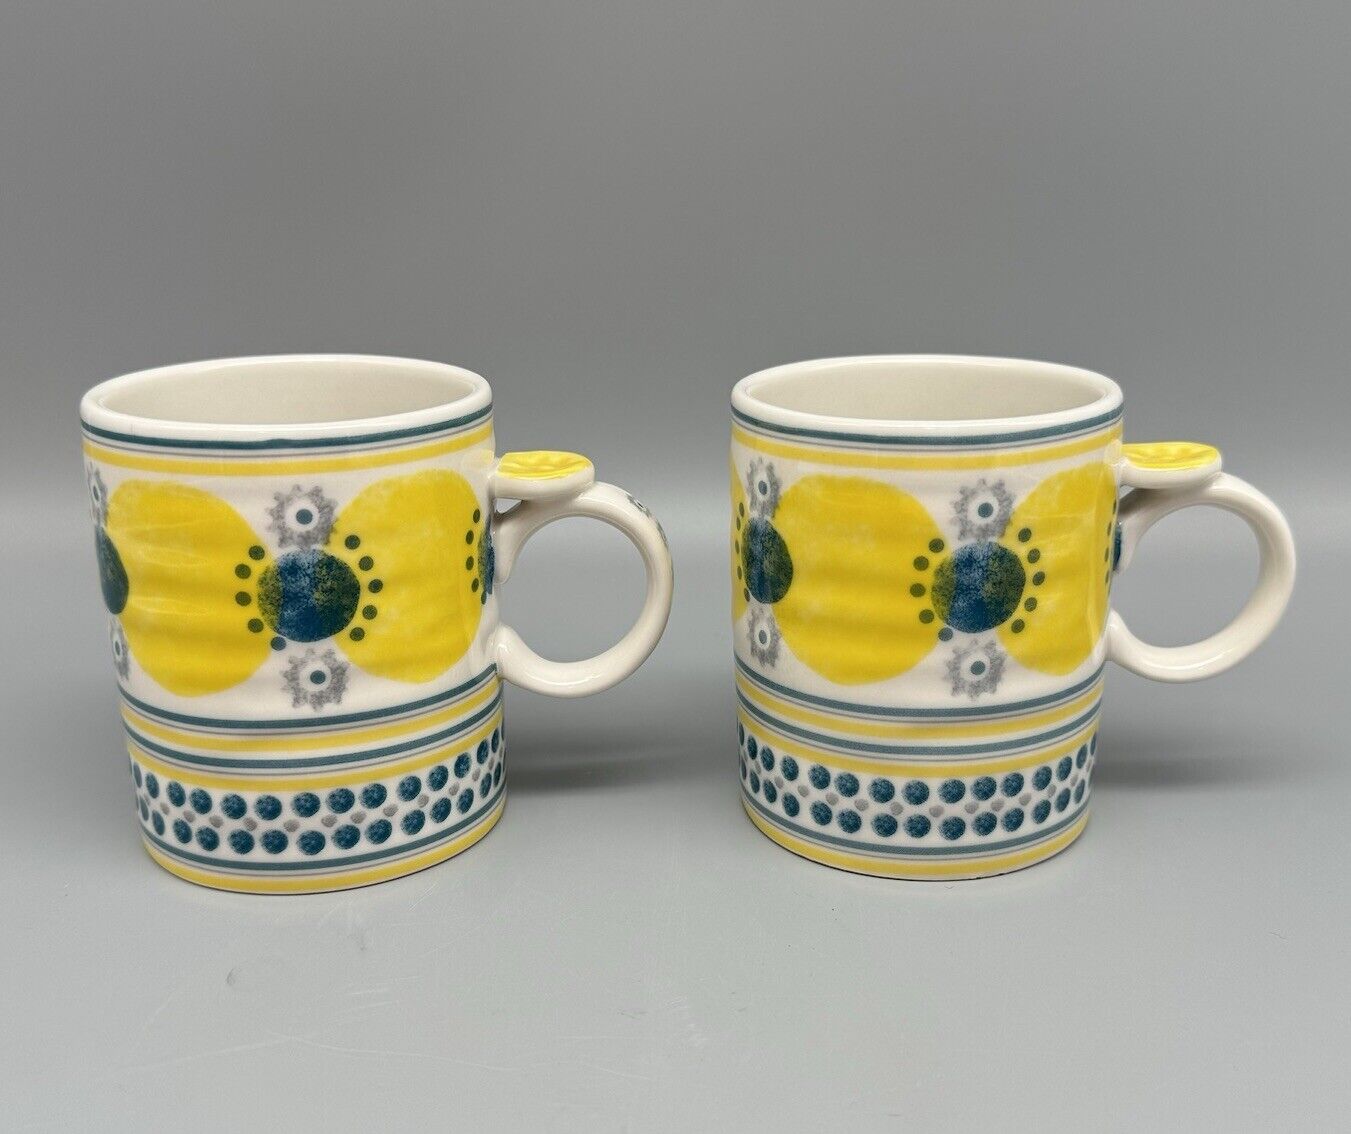 Anthropologie Biscuit Series Yellow And Blue Ceramic Cups Mugs Set Of 2